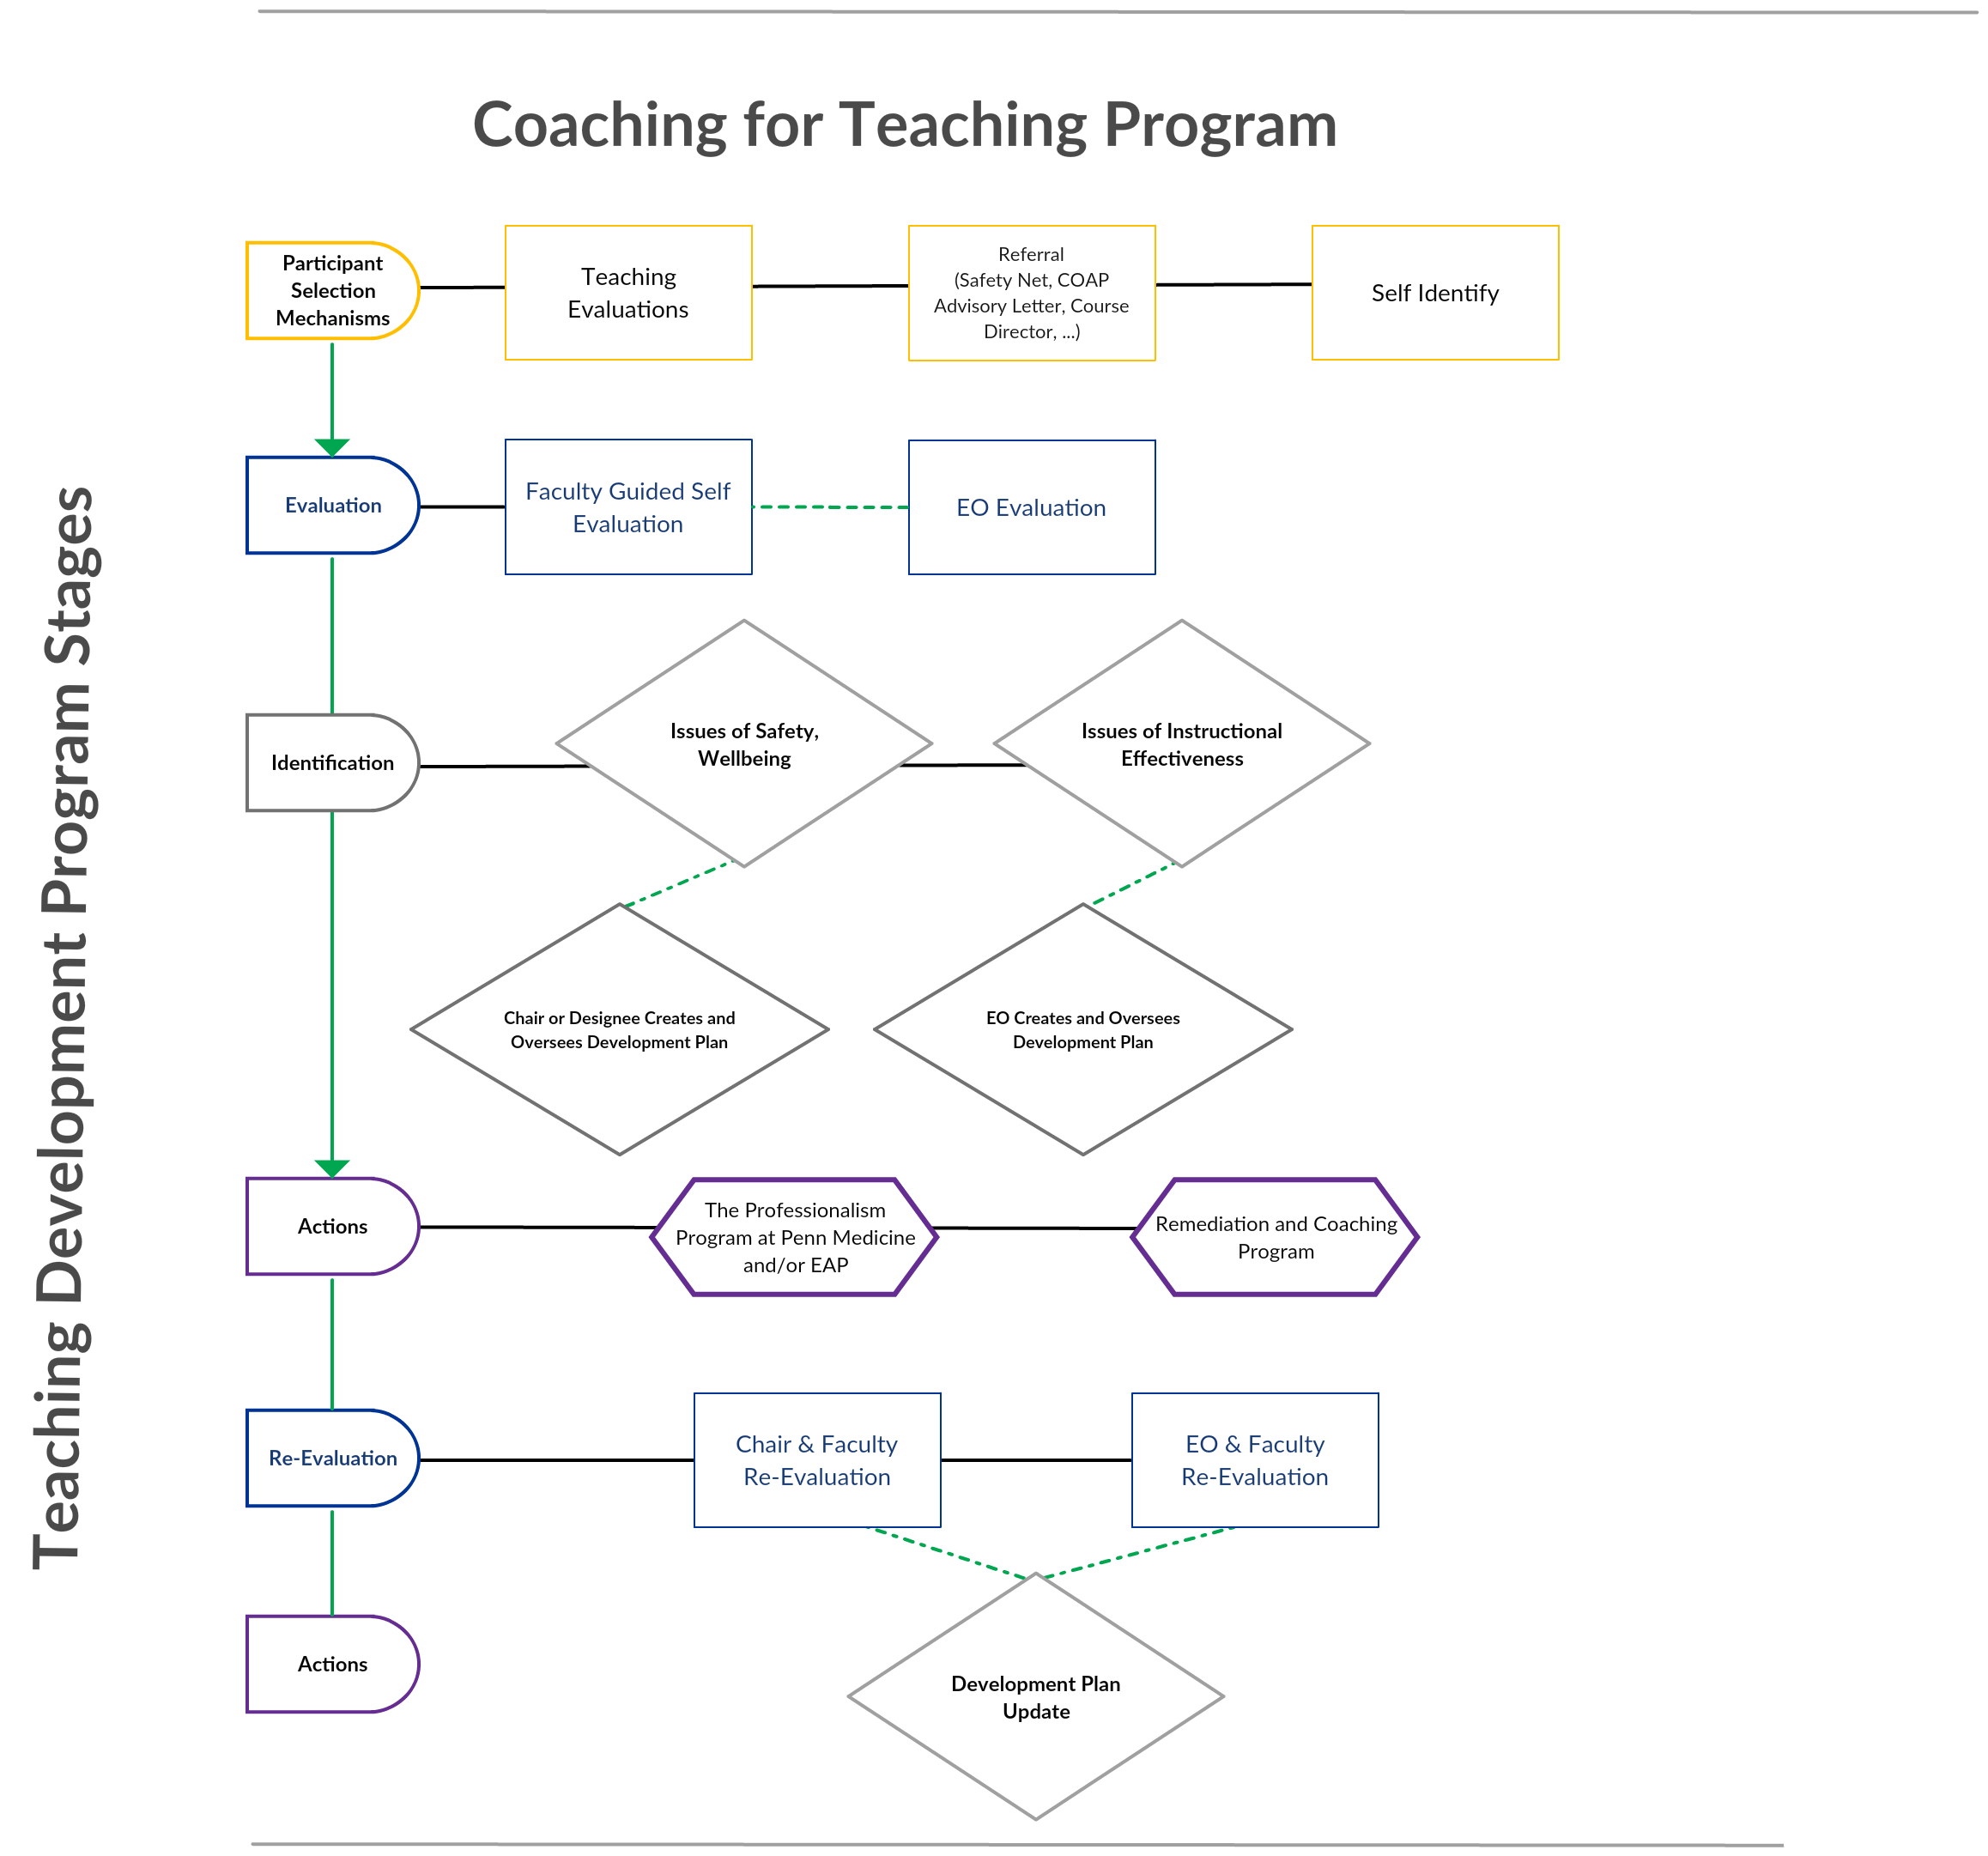 see description above in Teaching Development Program Stages and Coaching for Teaching Program